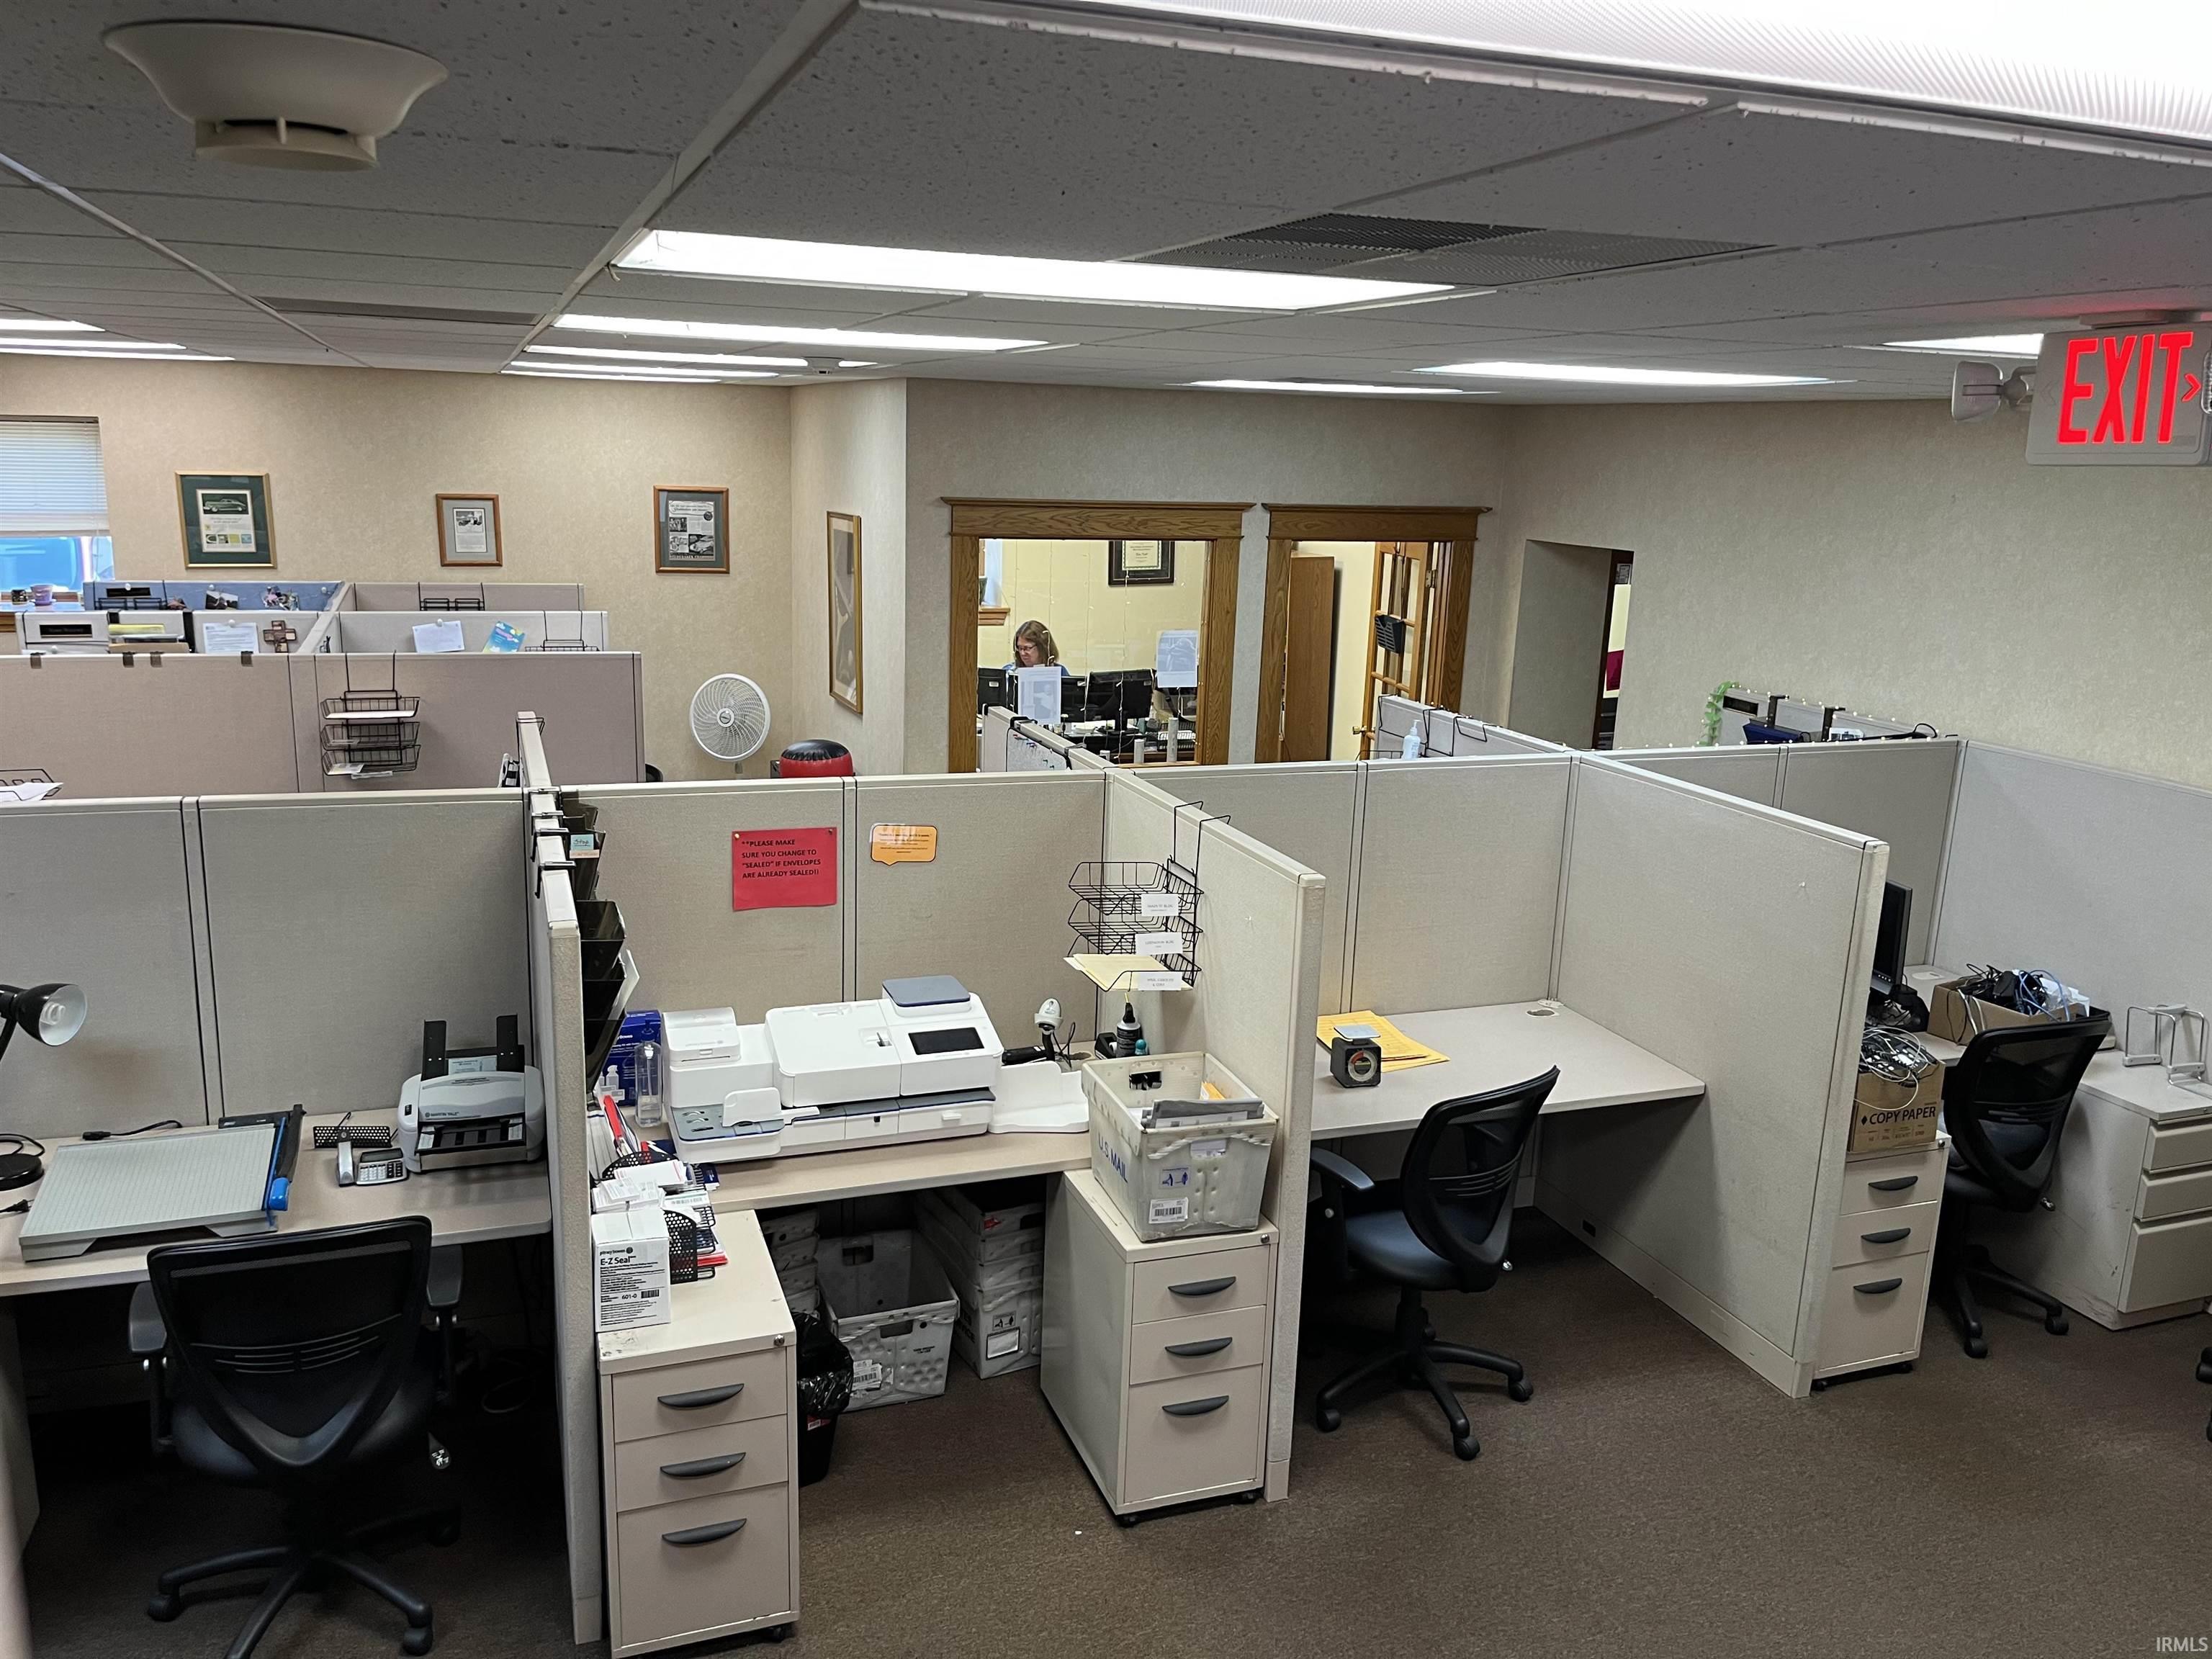 This is an example of several, large open work areas on both the first and second floors!